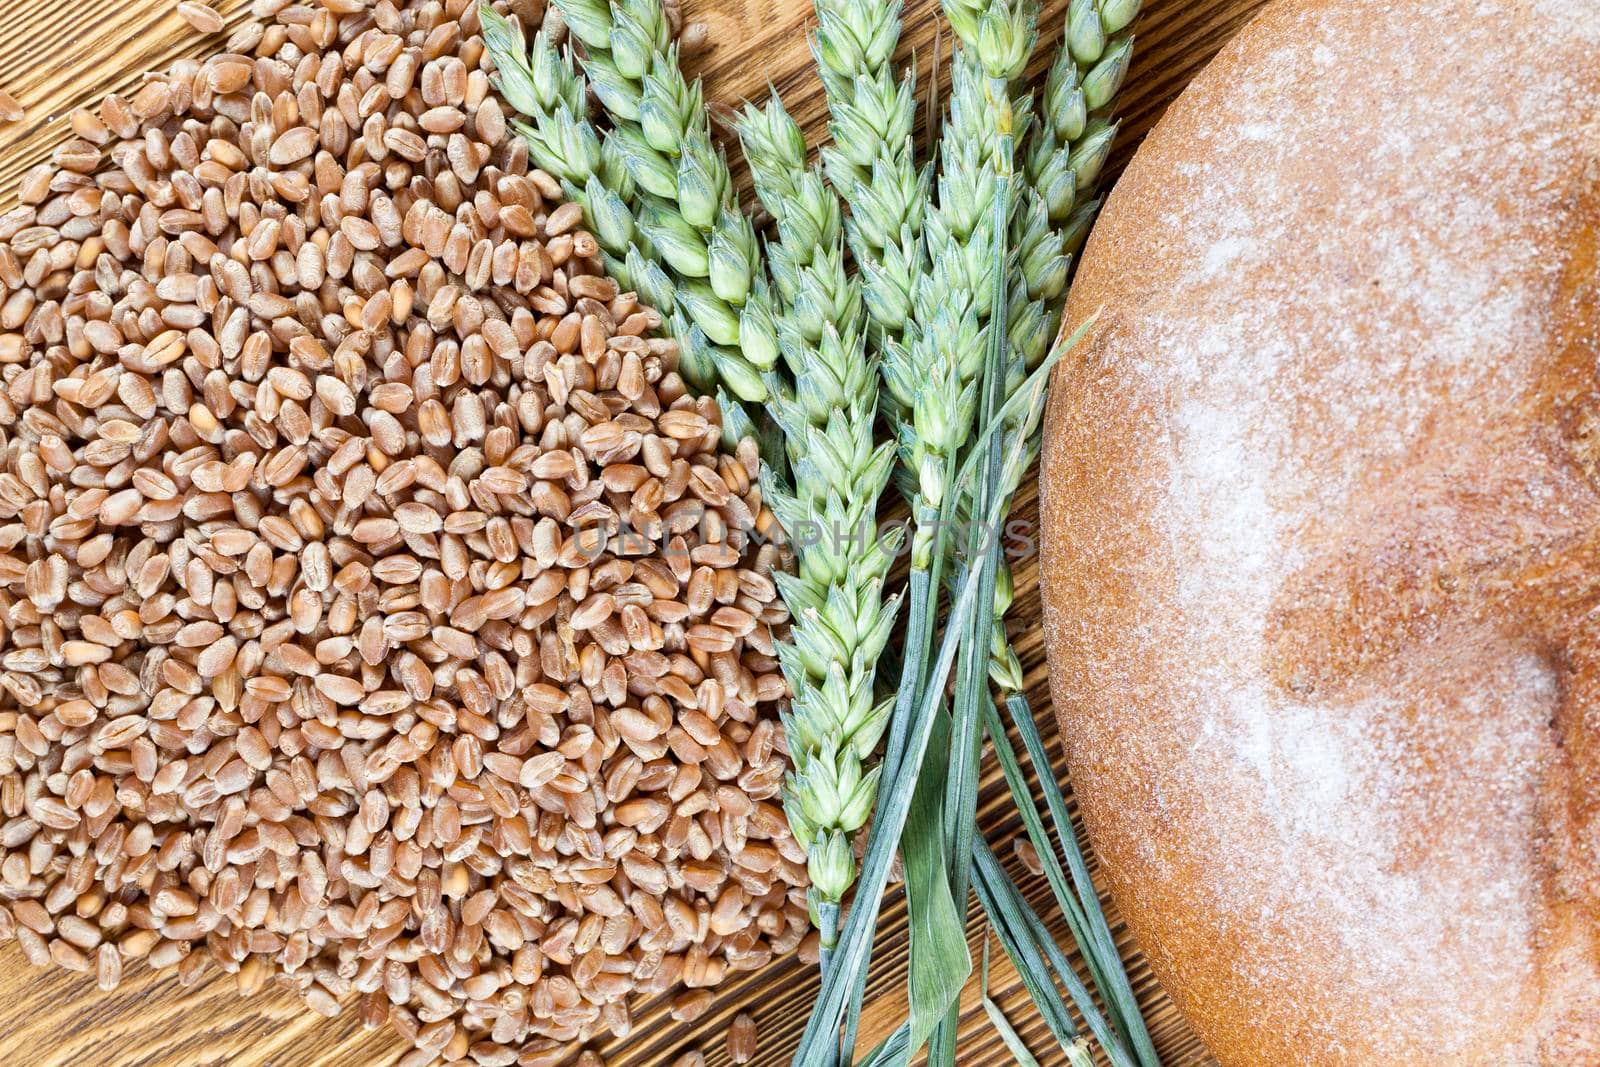 wheat grains, green wheat ears and bread lying on a wooden table, close-up photo from above